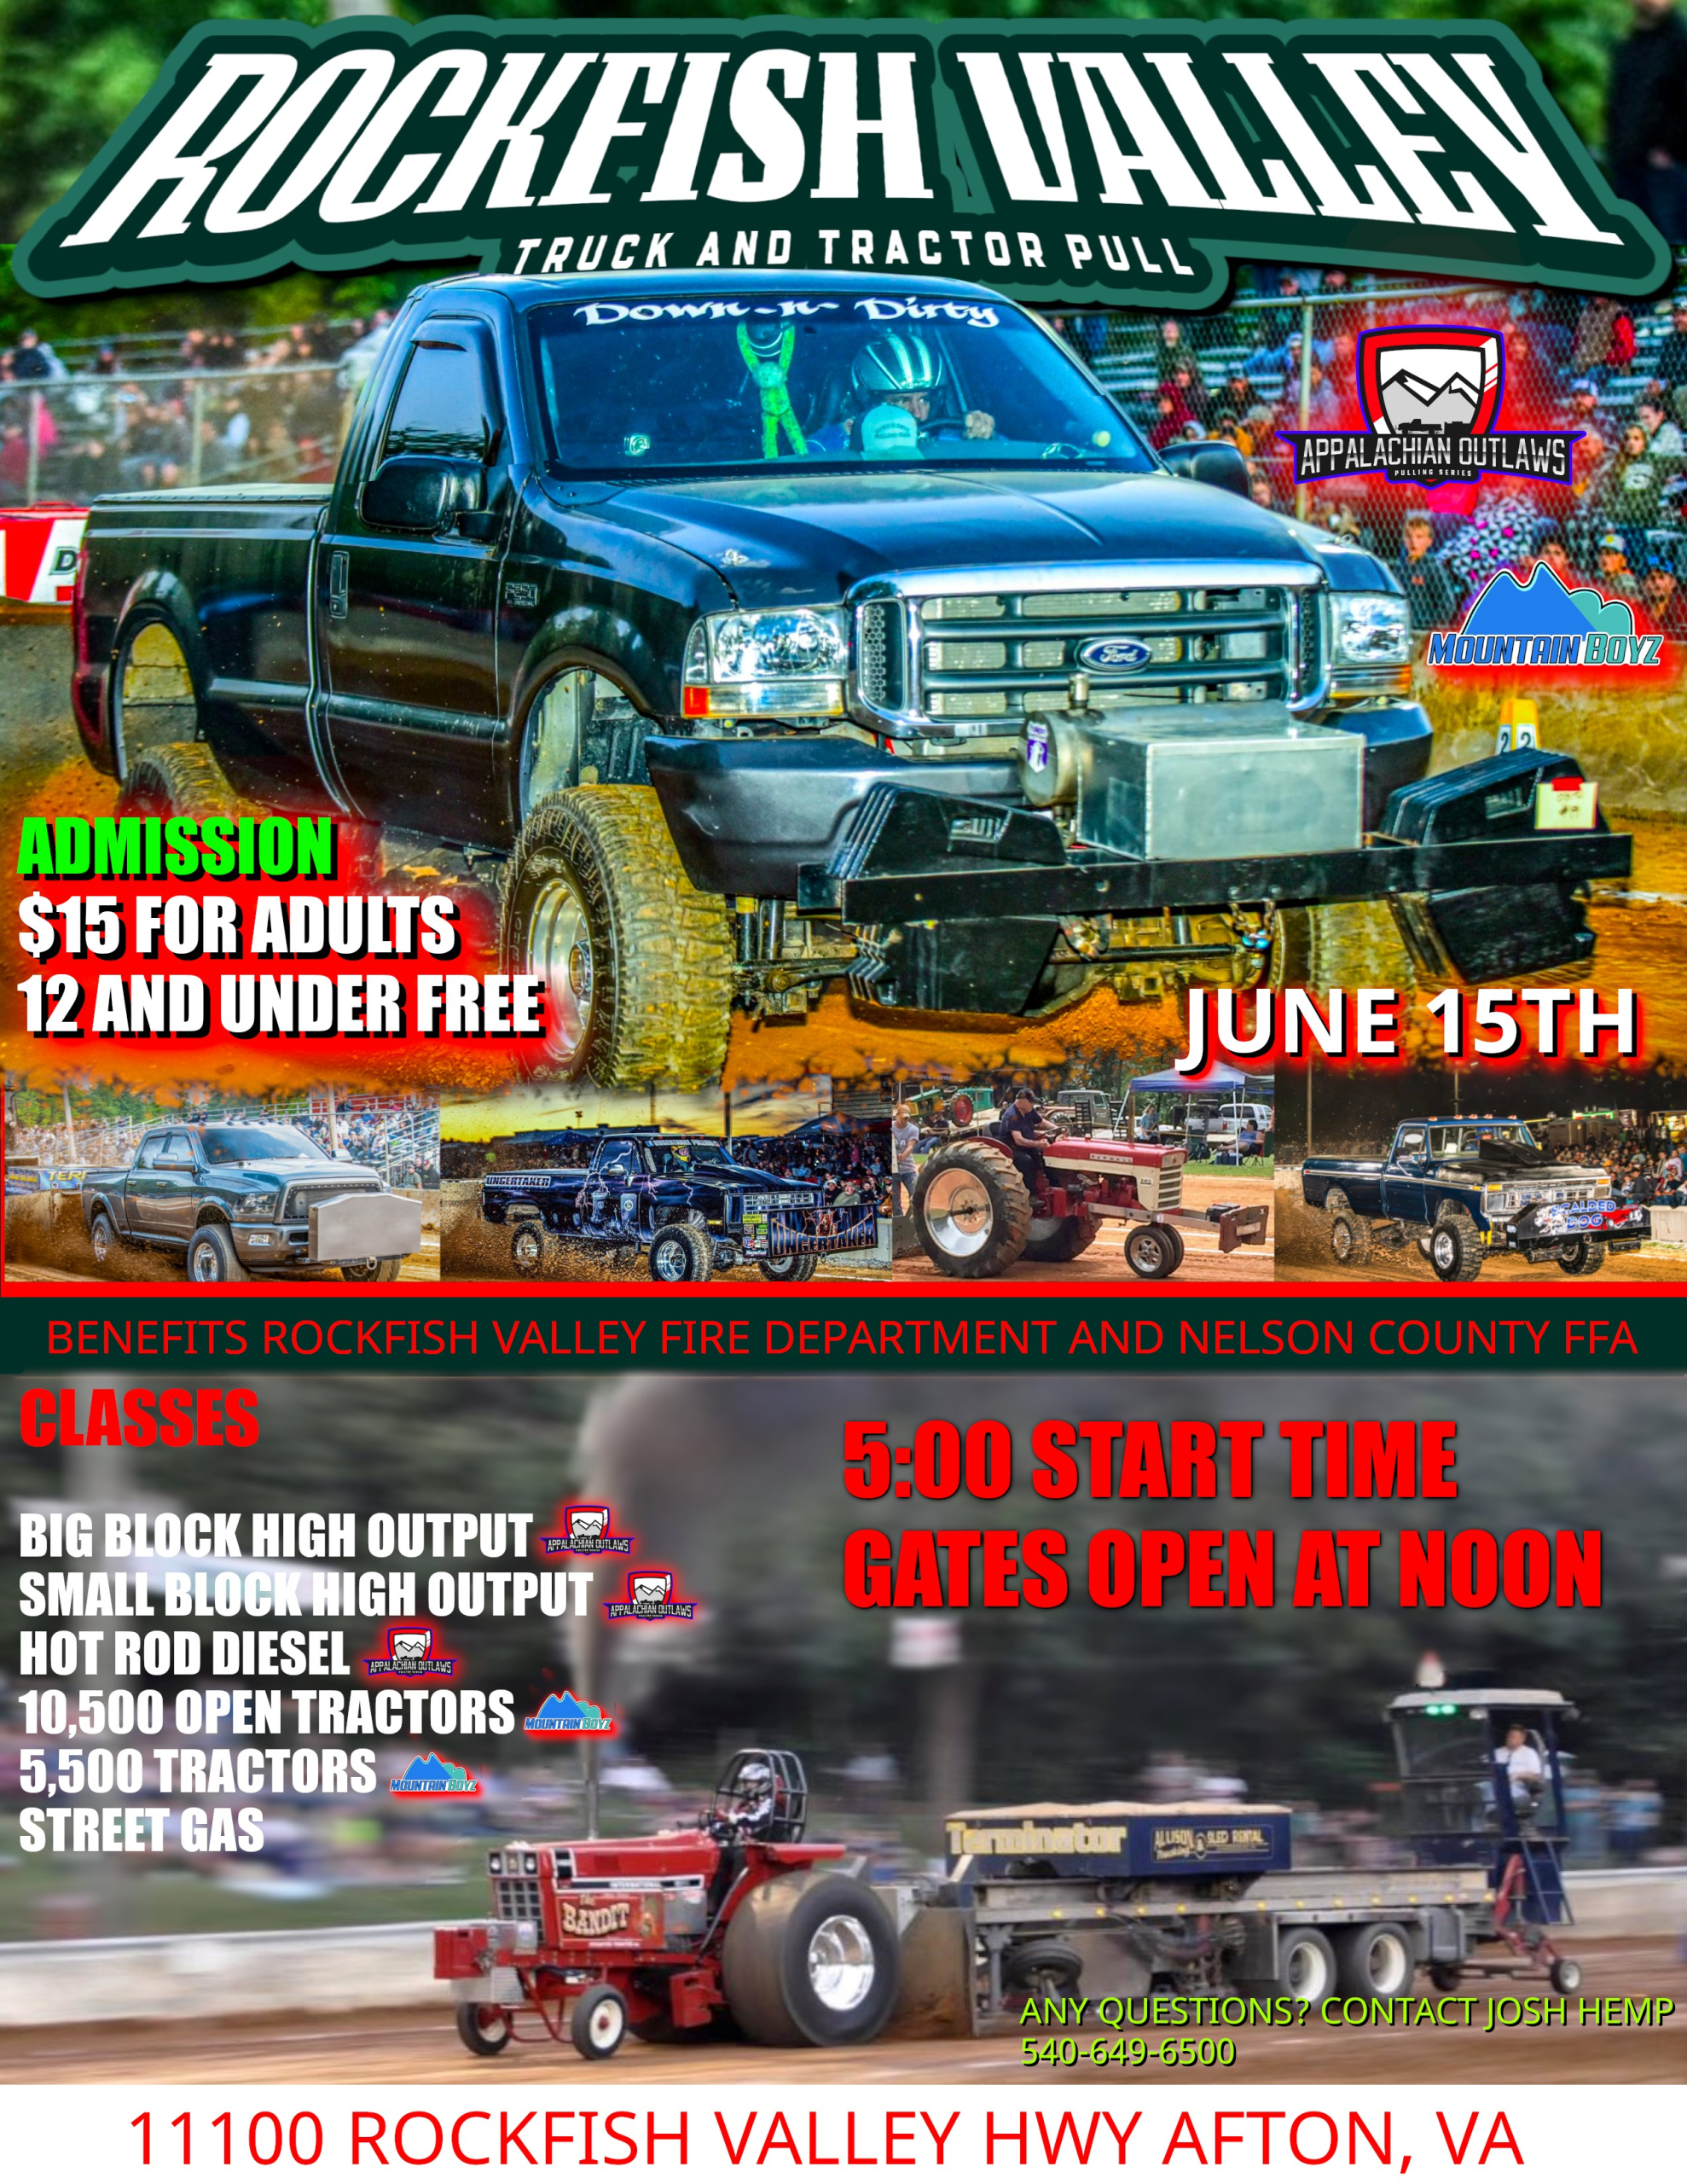 ROCKFISH VALLEY TRUCK AND TRACTOR PULL SATURDAY JUNE 15TH AT THE ROCKFISH VALLEY FIRE DEPARTMENT IN AFTON